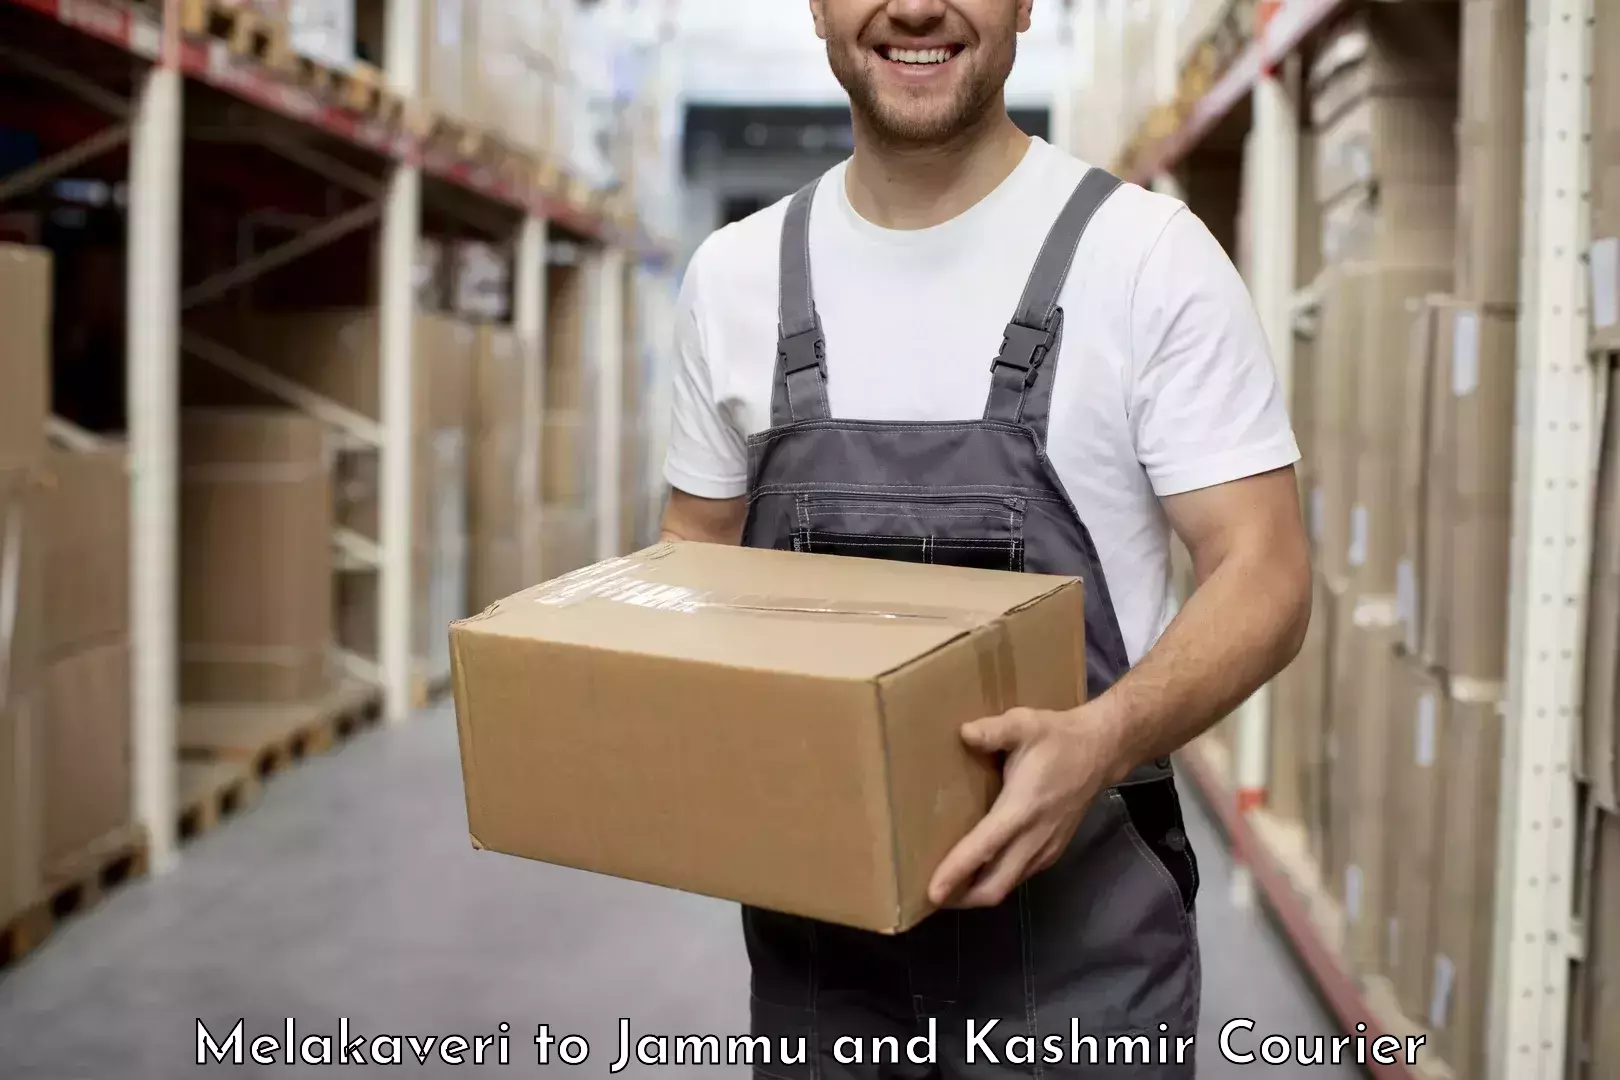 State-of-the-art courier technology Melakaveri to Katra